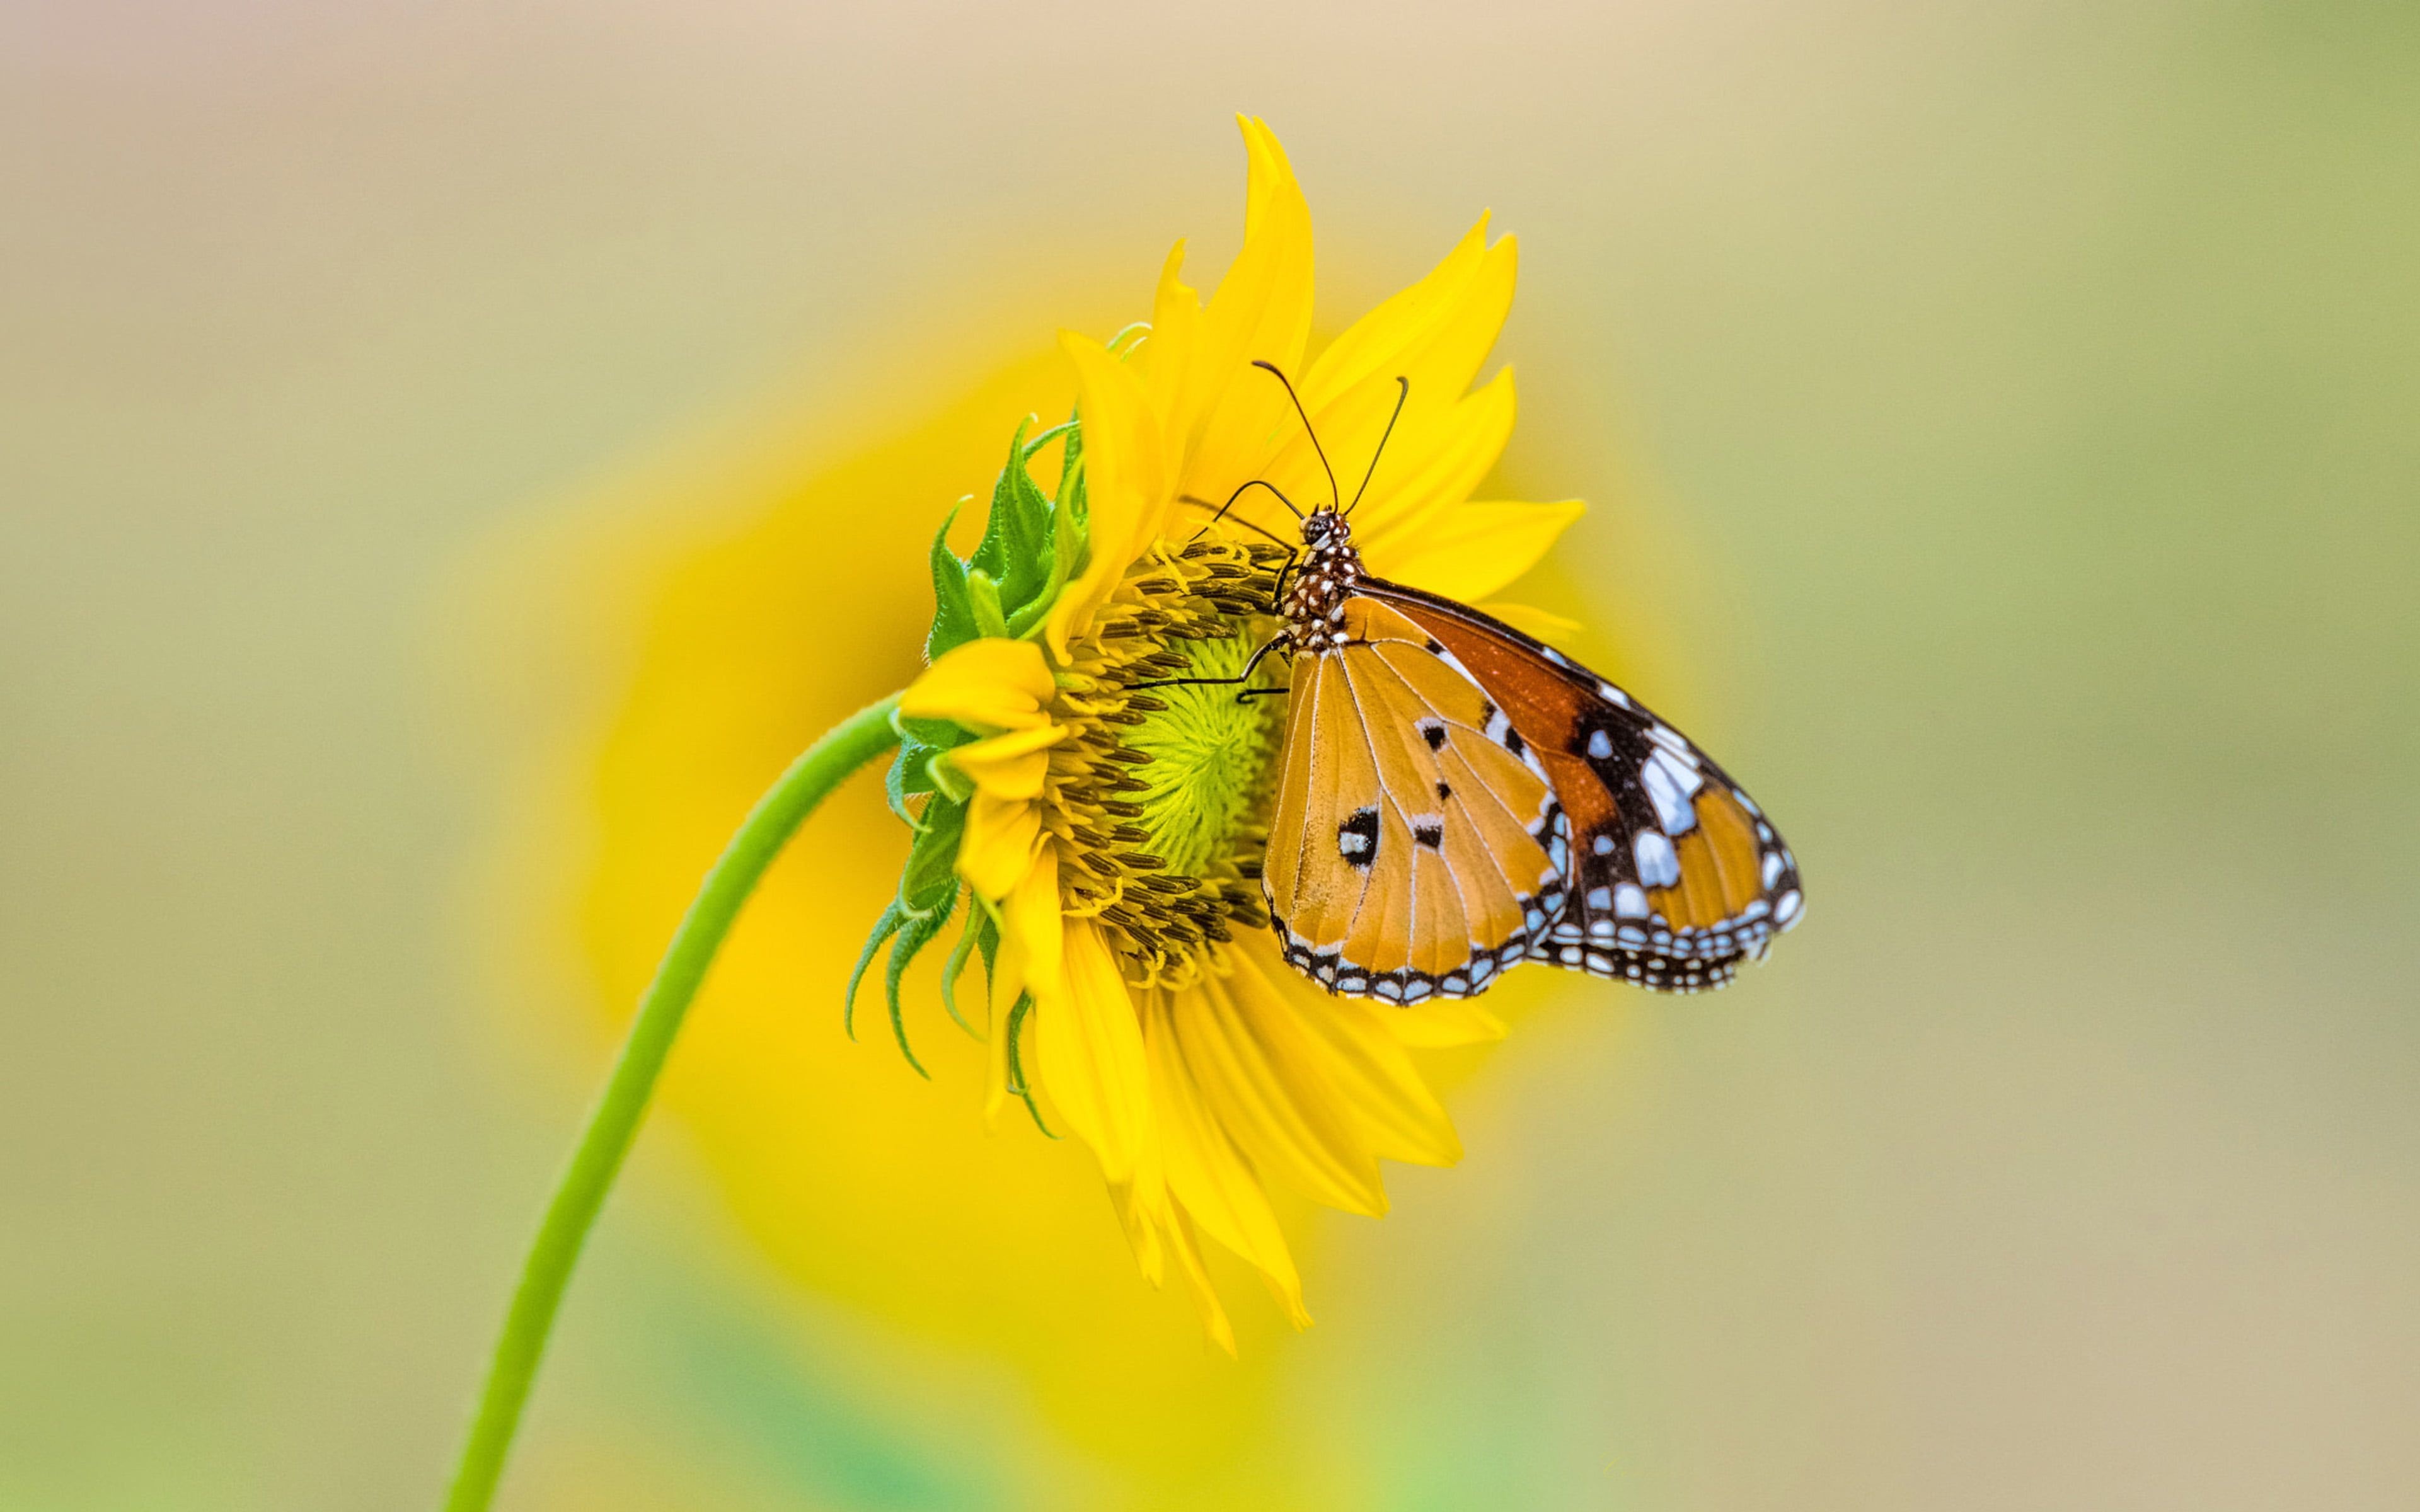 Insect Tiger Butterfly On Yellow Color From Sunflower 4k Ultra HD Tv Wallpaper For Desktop La. Desktop wallpaper, Cool desktop wallpaper, 4k wallpaper for mobile